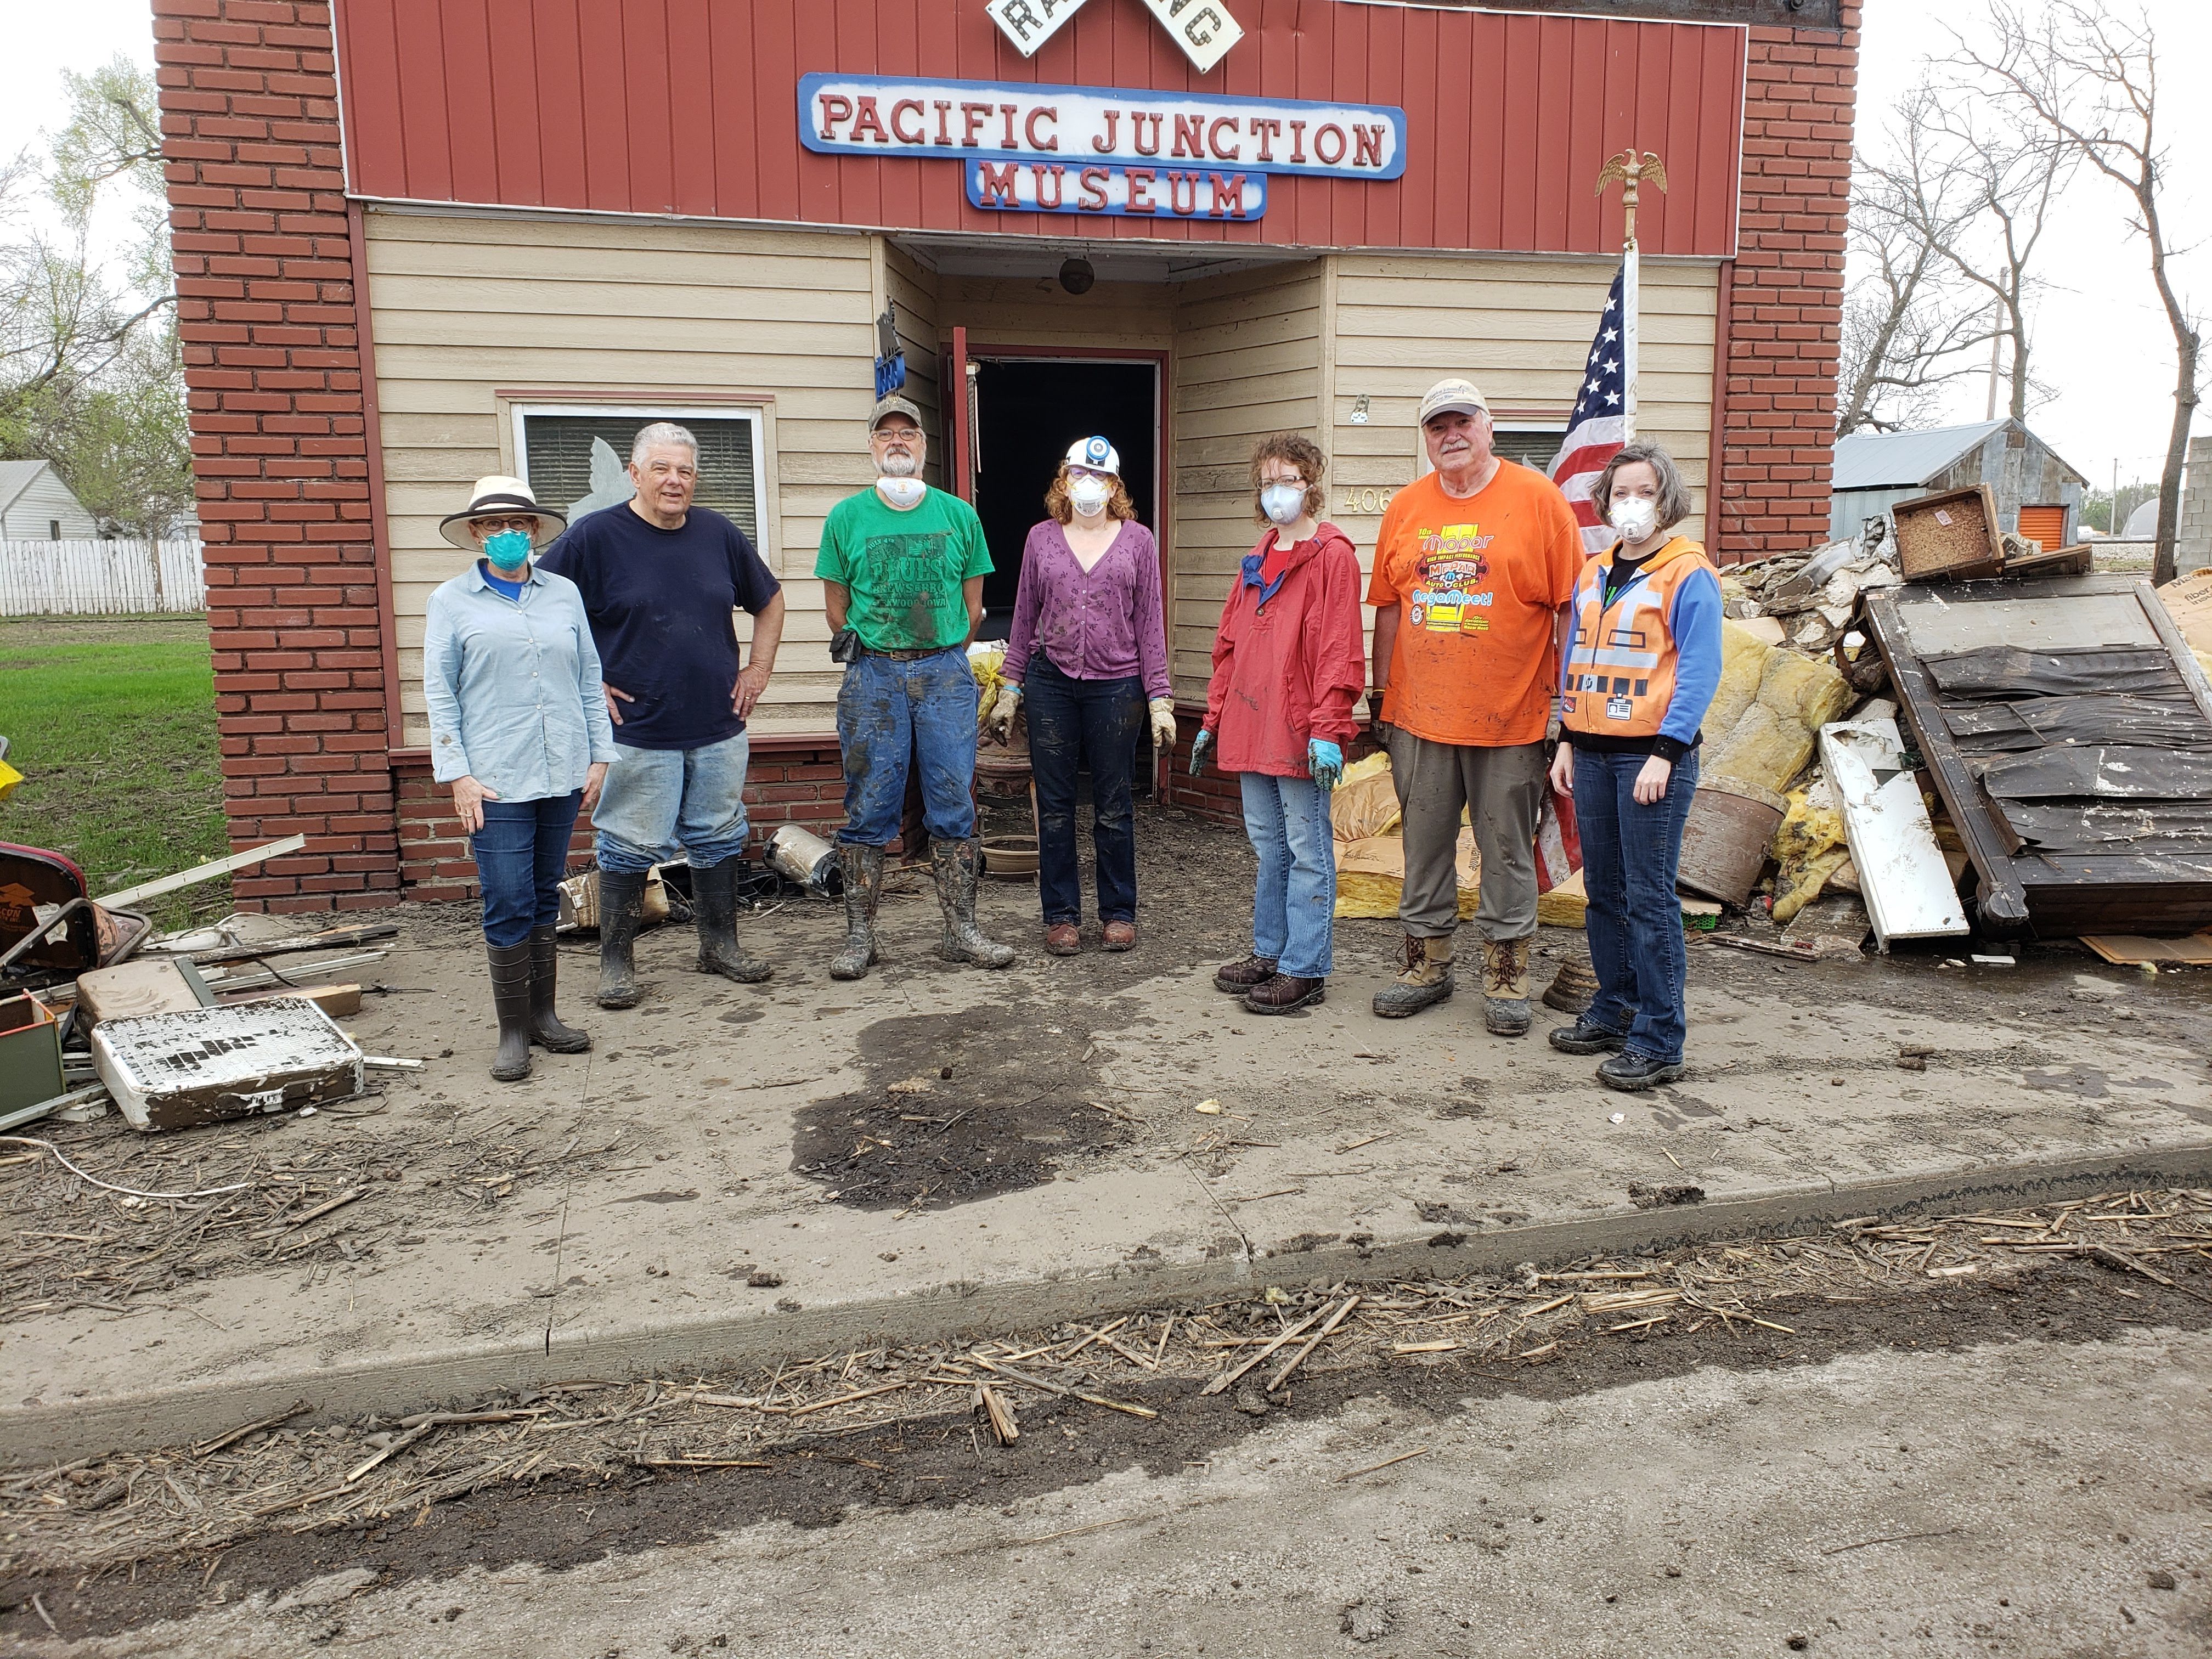 Seven IMALERT members pause for a group photo in front of the Pacific Junction Railroad Museum.